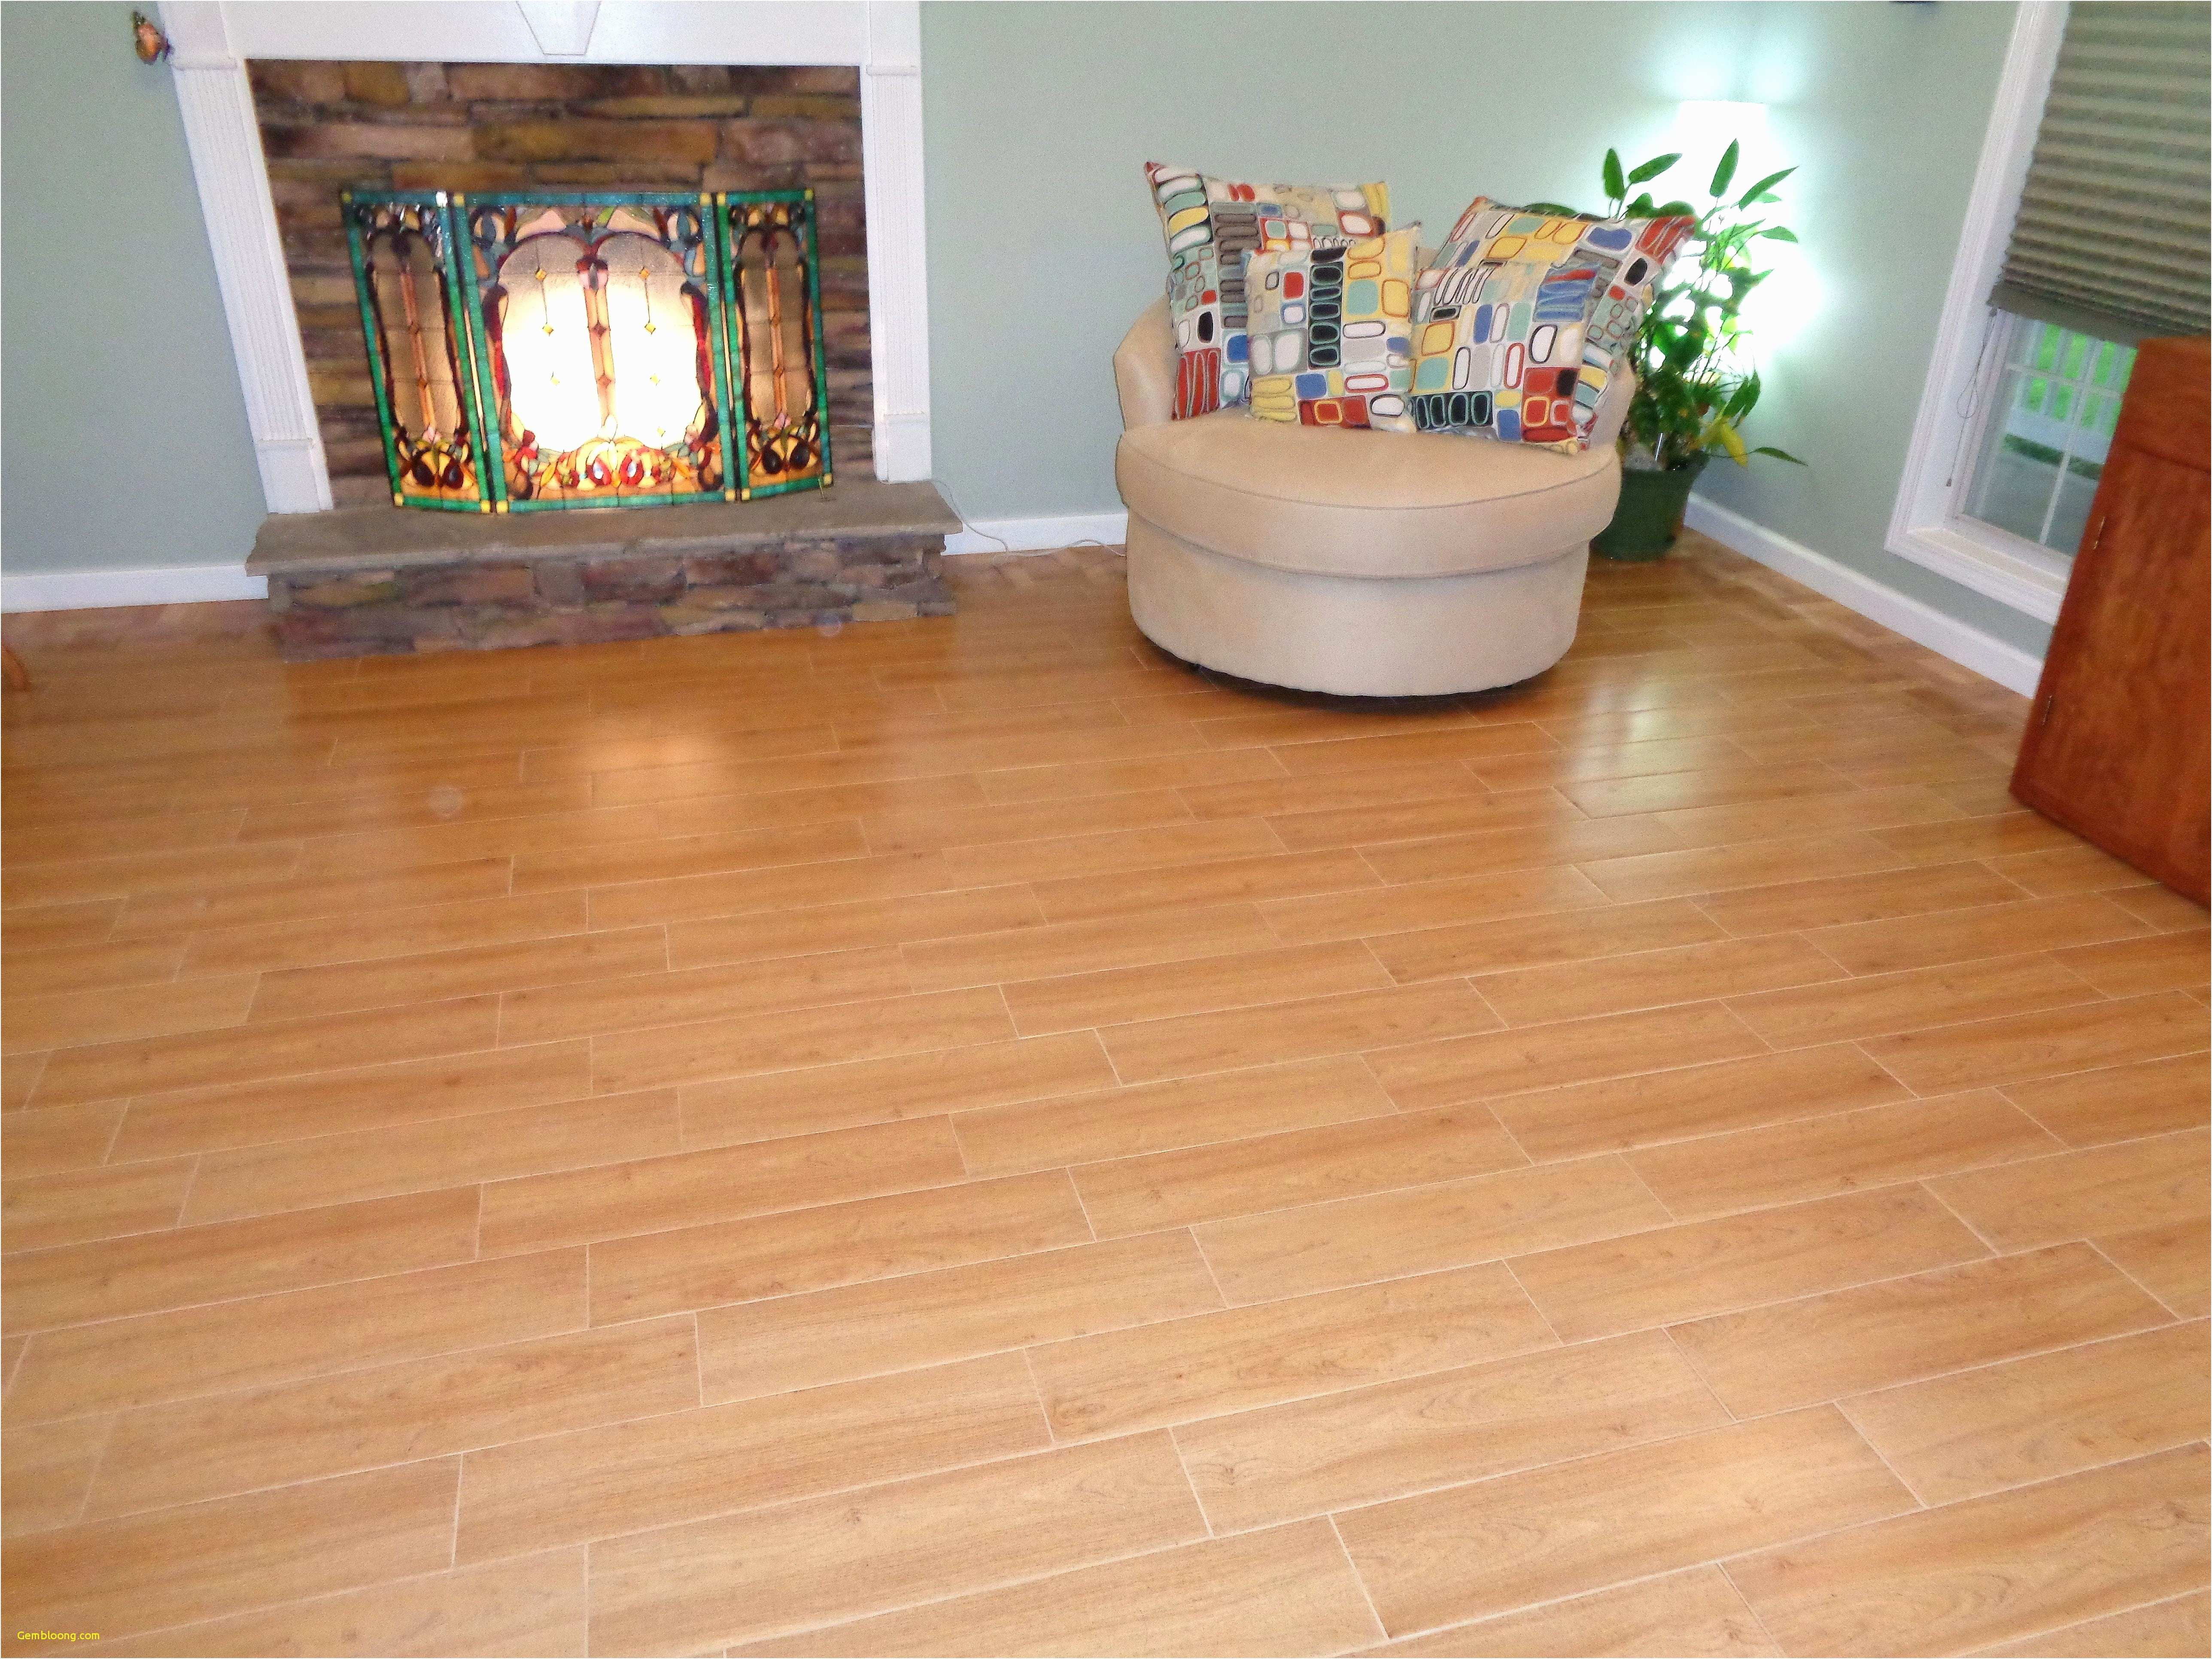 refinished hardwood floors before and after of wood for floors facesinnature regarding discount laminate flooring laminate wood flooring sale best clearance flooring 0d unique